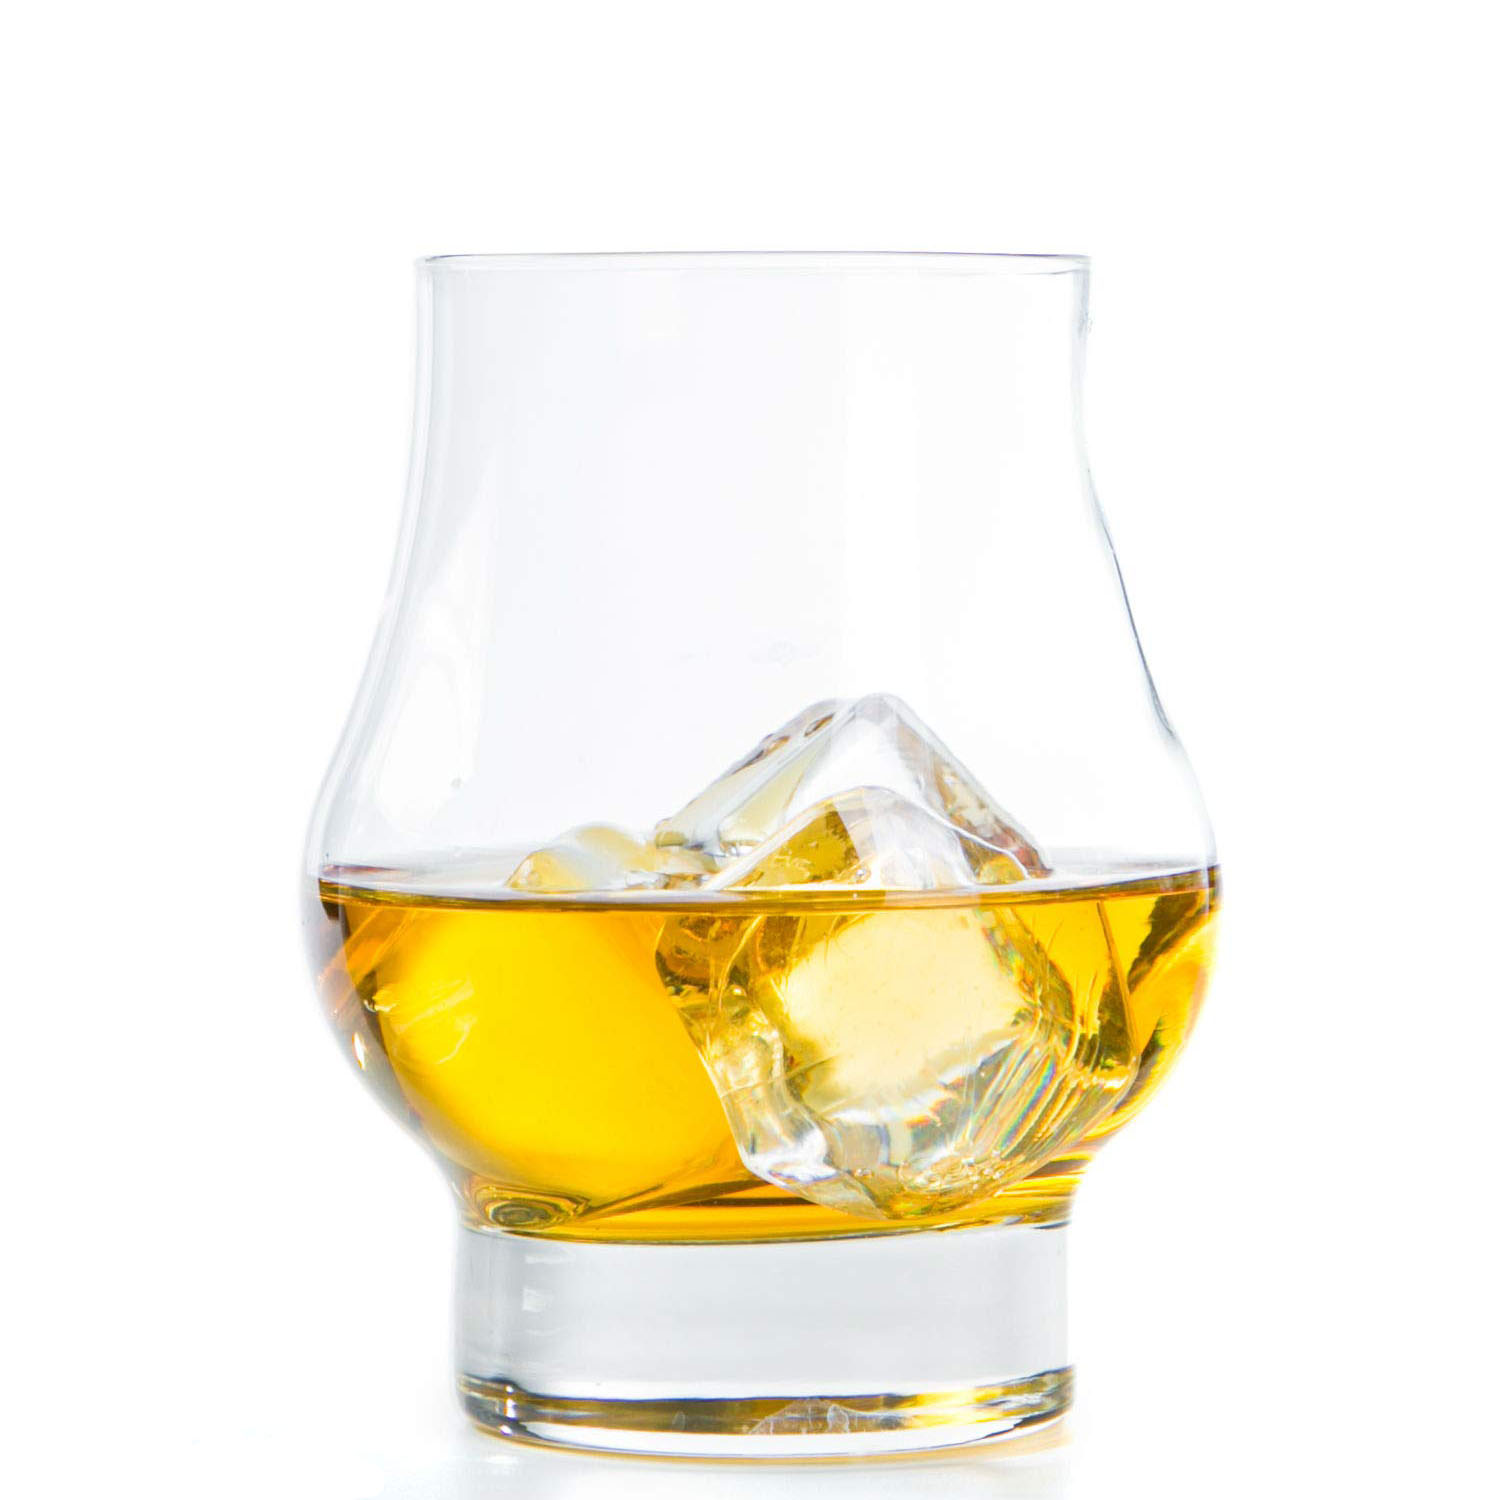 Whiskey Glass Set of 2 10.5oz Rocks Glasses Glassware for Scotch Bourbon Featured Image